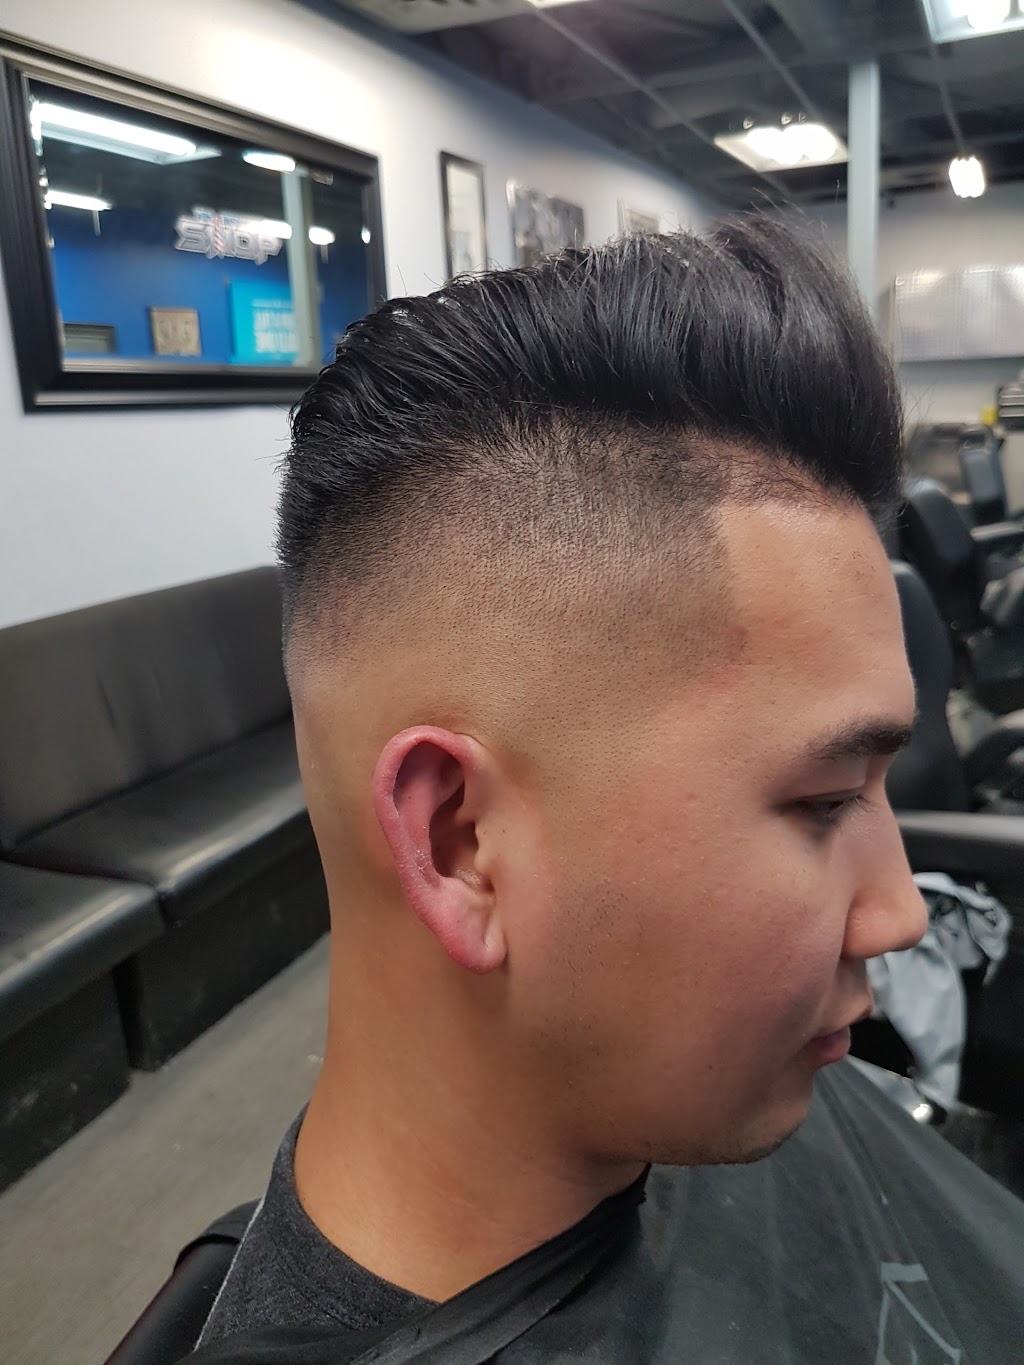 Mr. Barber Millwoods Tipaskin | 3210 82 St NW, Edmonton, AB T6K 3Y3, Canada | Phone: (780) 758-9995